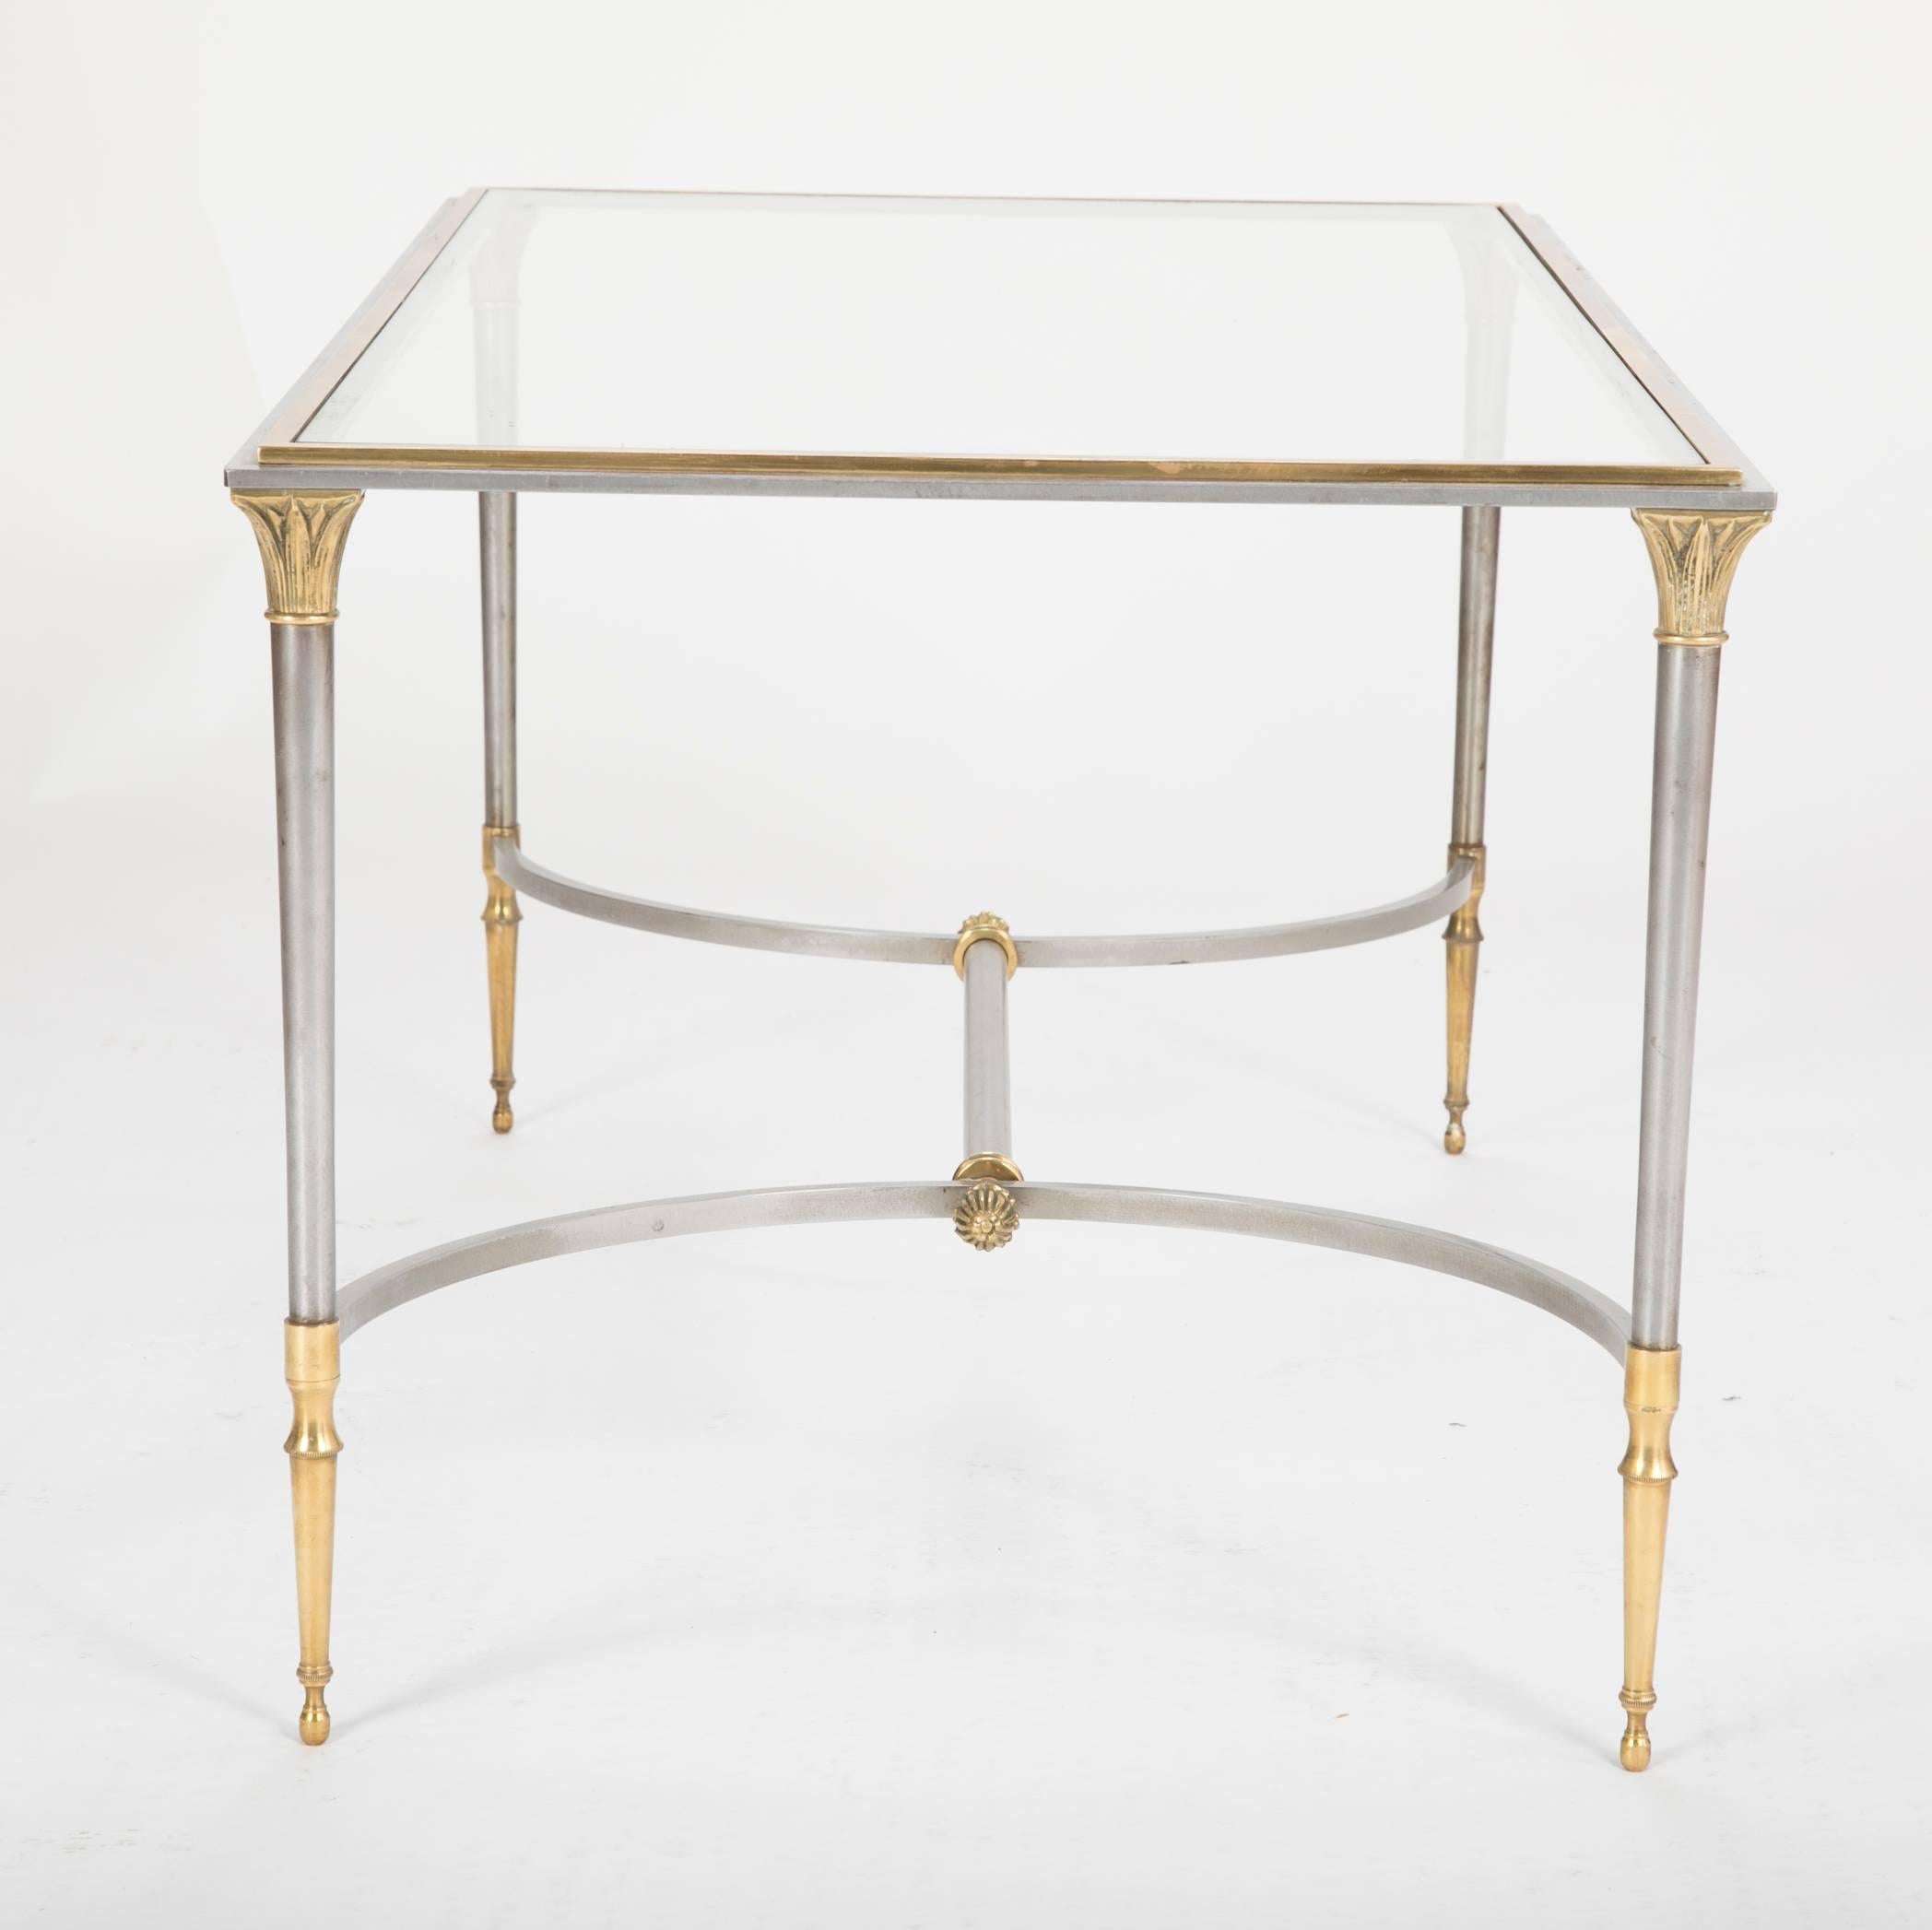 French Maison Charles Steel and Gilt Bronze Coffee Table in the Maison Jansen Taste